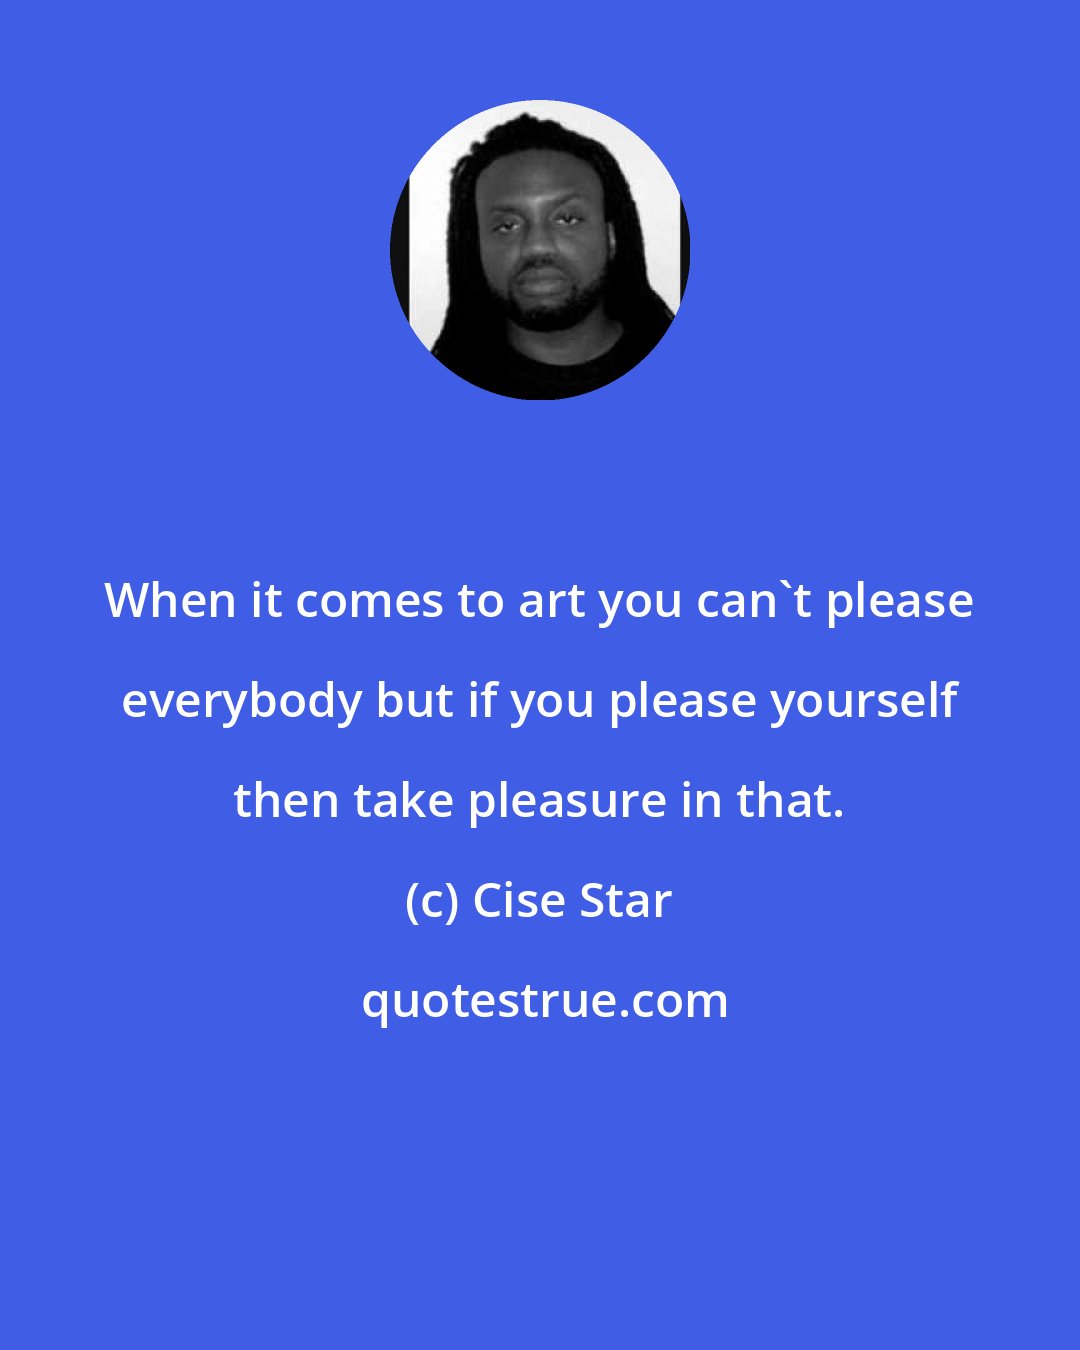 Cise Star: When it comes to art you can't please everybody but if you please yourself then take pleasure in that.